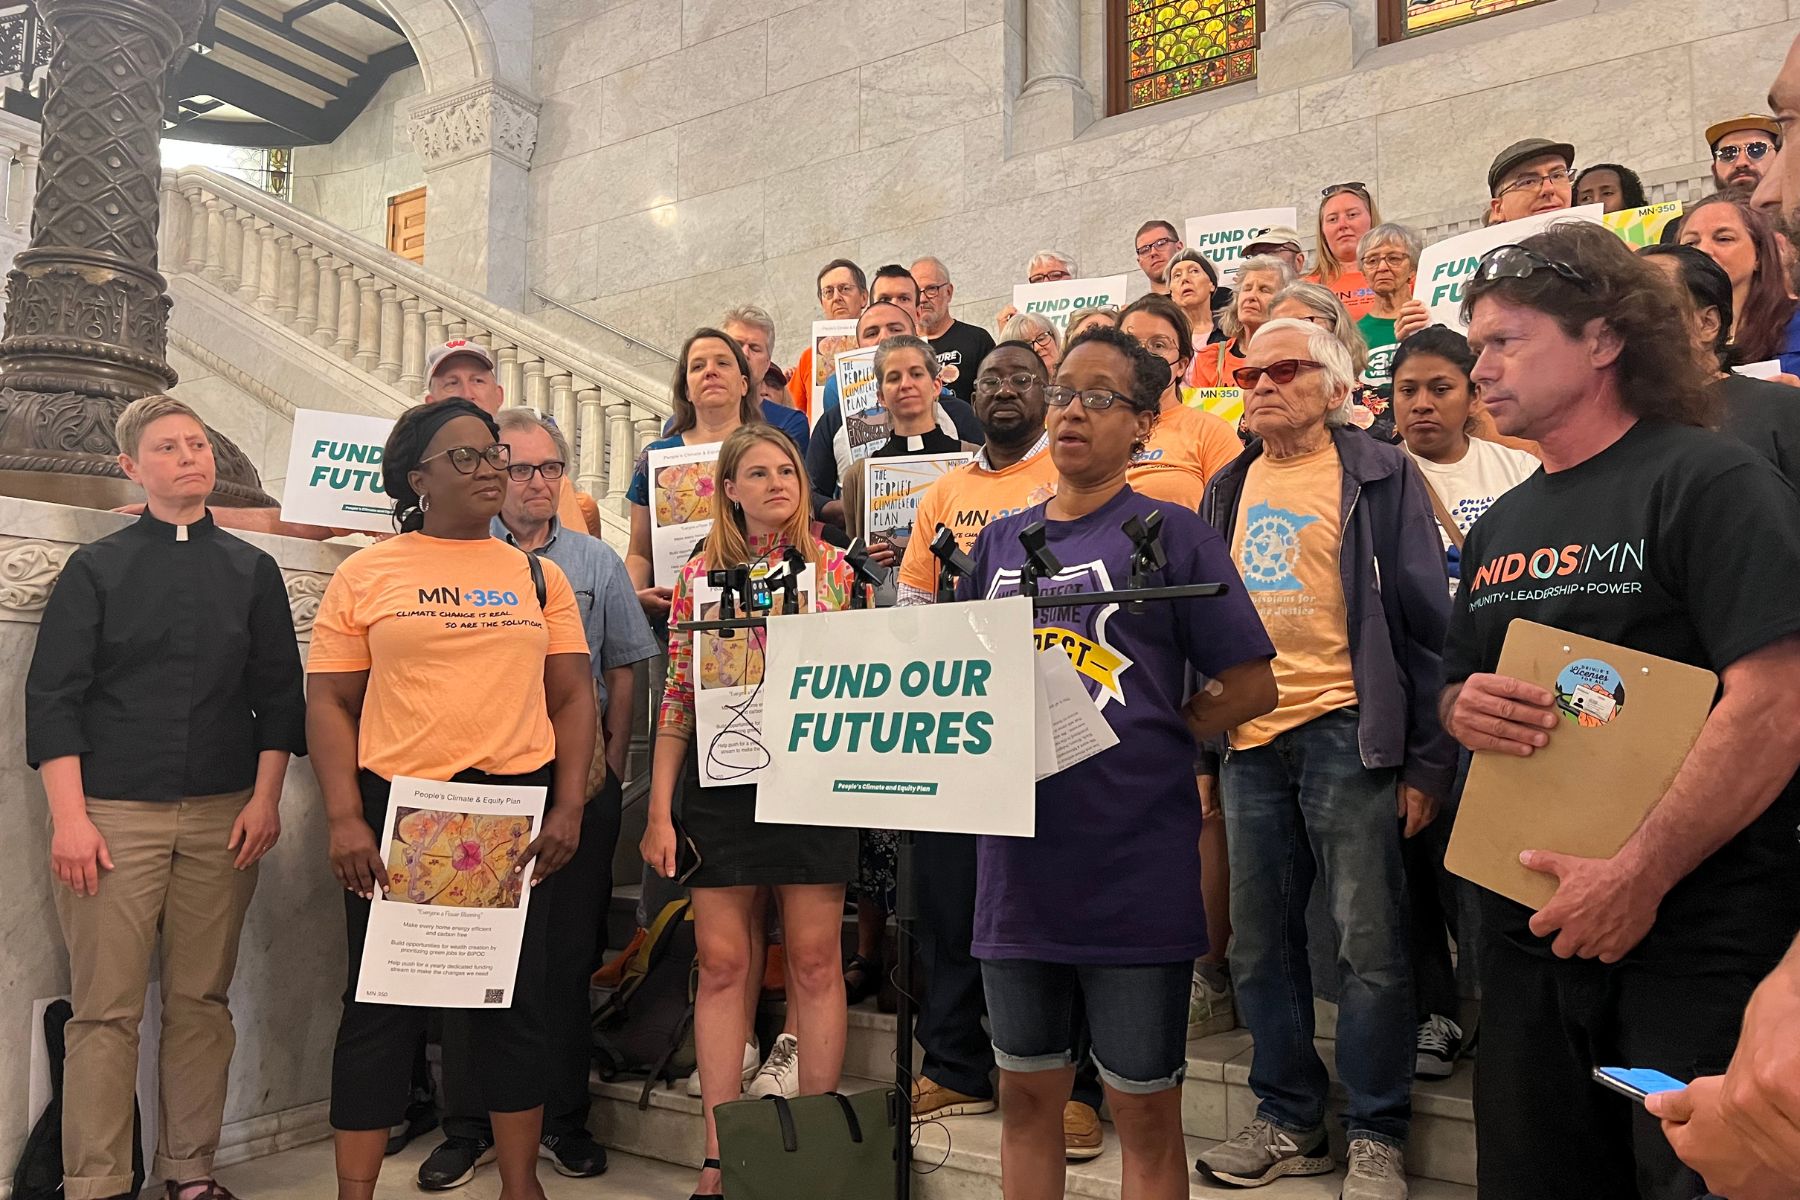 Samarra Meek with SEIU Local 26 speaks in favor of funding for the Minneapolis climate plan at a June 7 rally at city hall.